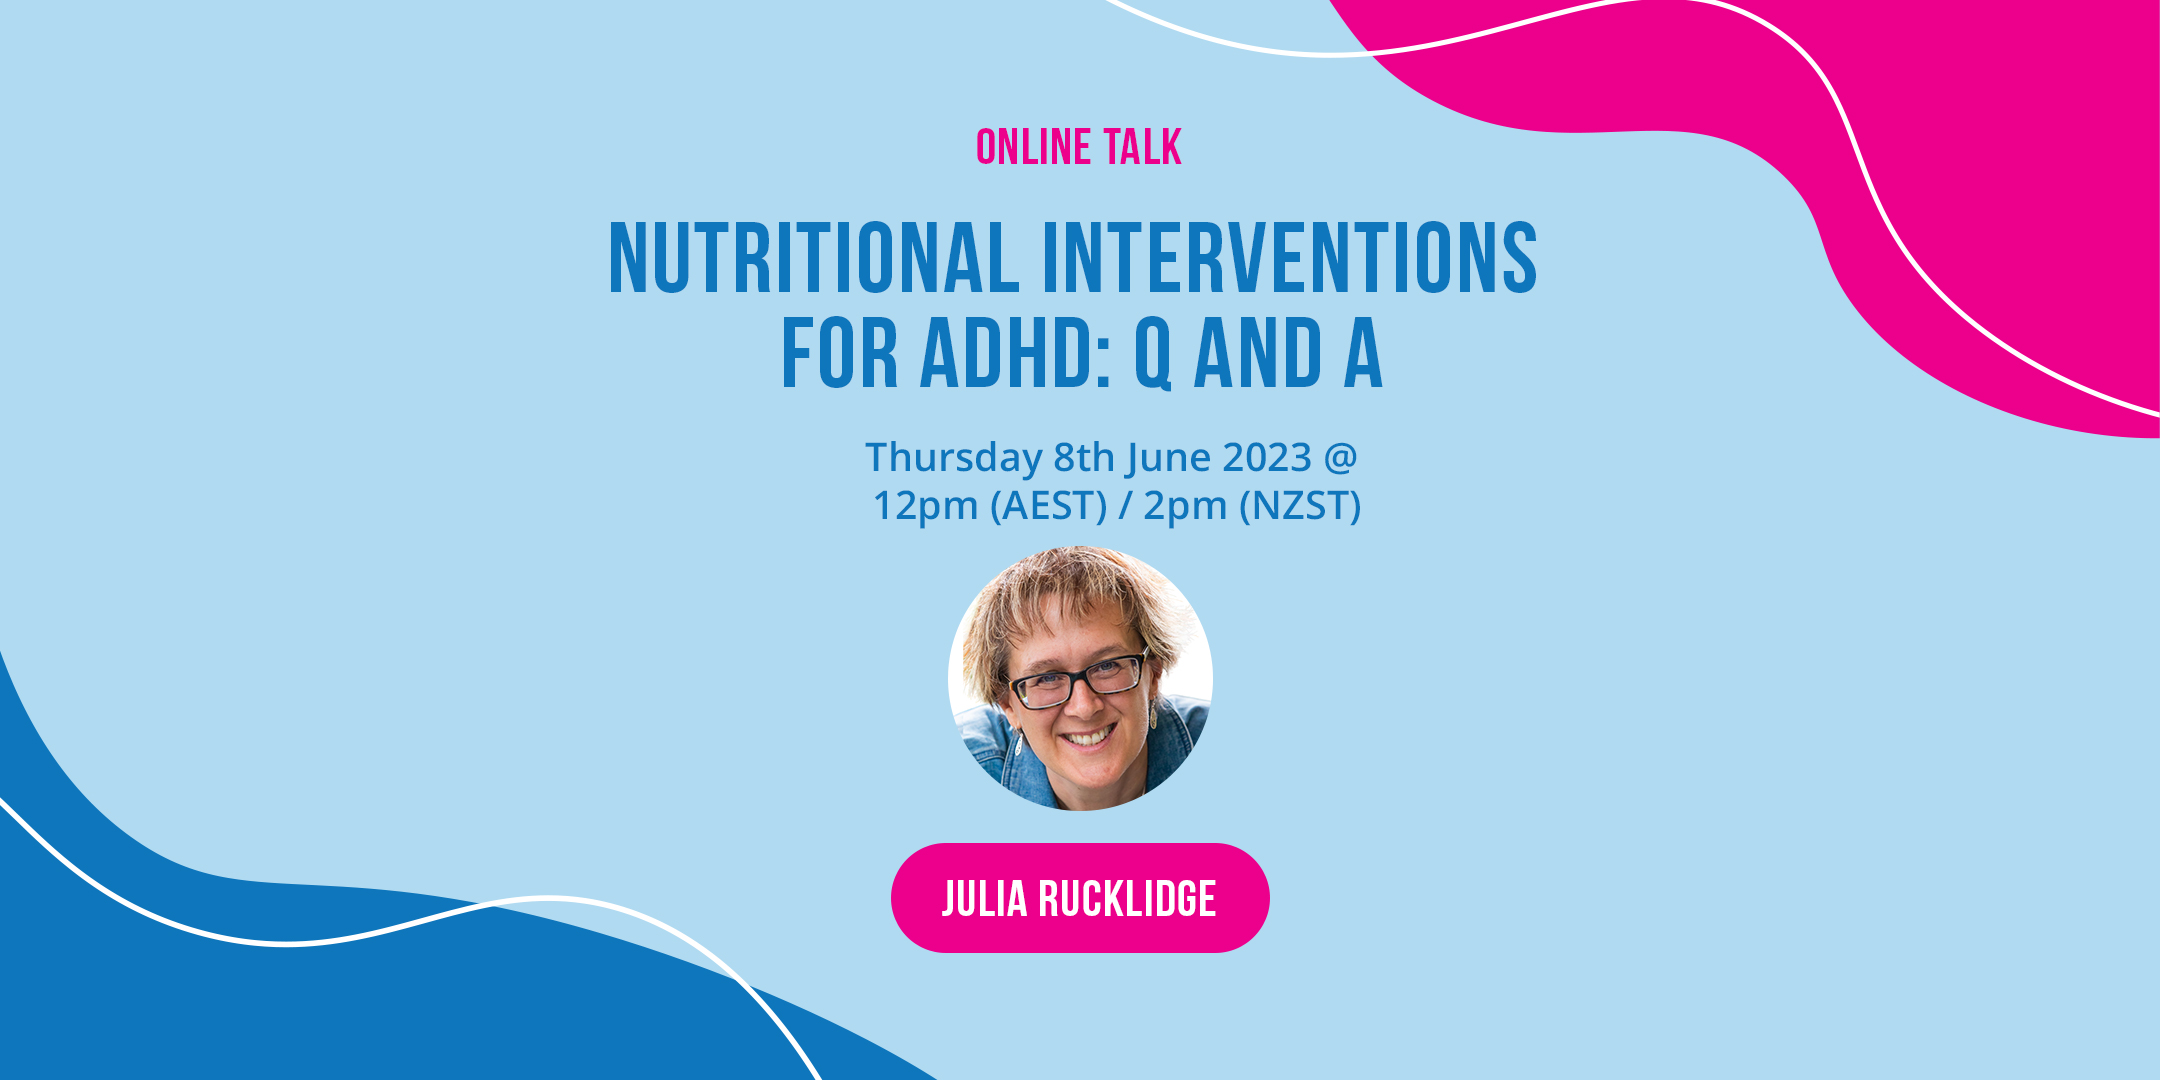 Online Talk Nutritional Interventions for ADHD: Q&A June 8, 2023 Thursday 12:00PM AEST/ 2PM NZST